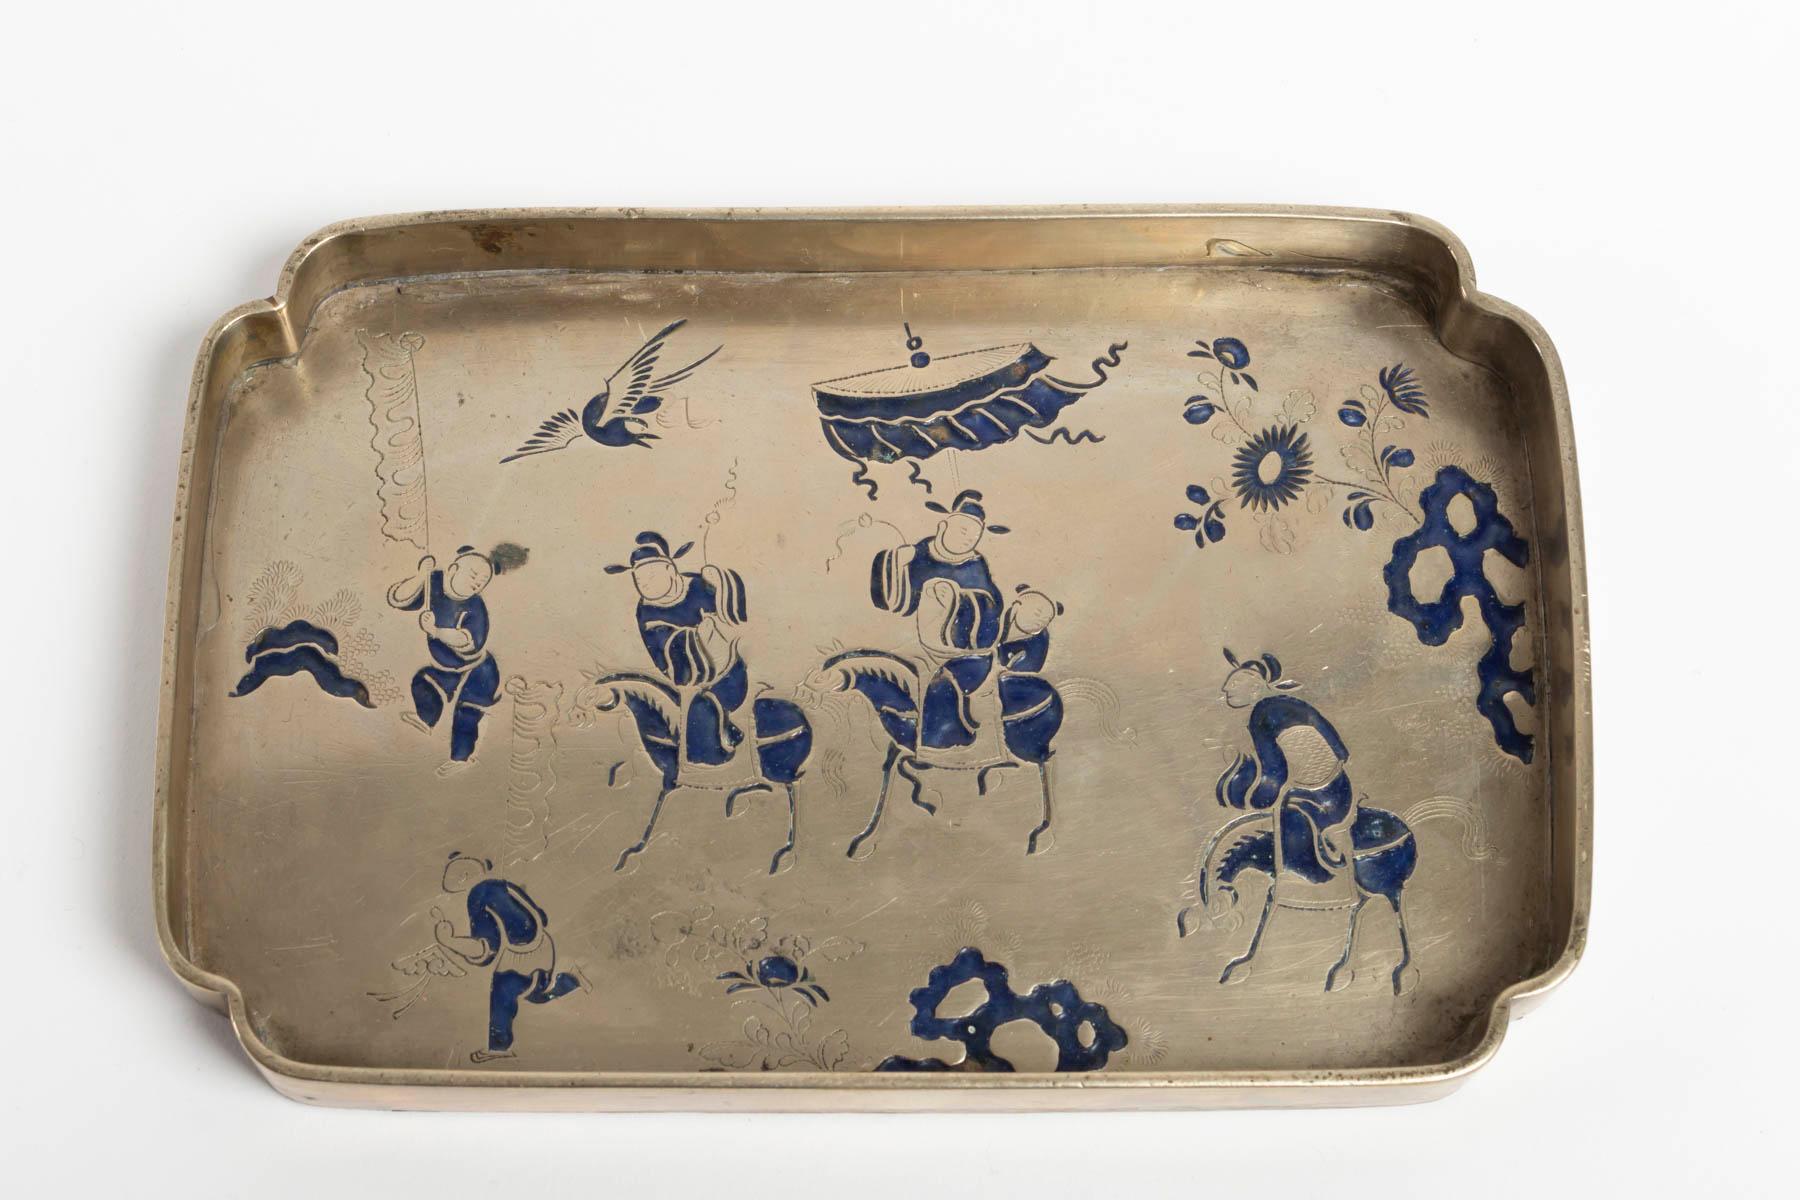 Small tray required for opium metal white enameled from a stage of blue horsemen, China, 1900.
Measures: L 12cm, W 17cm.